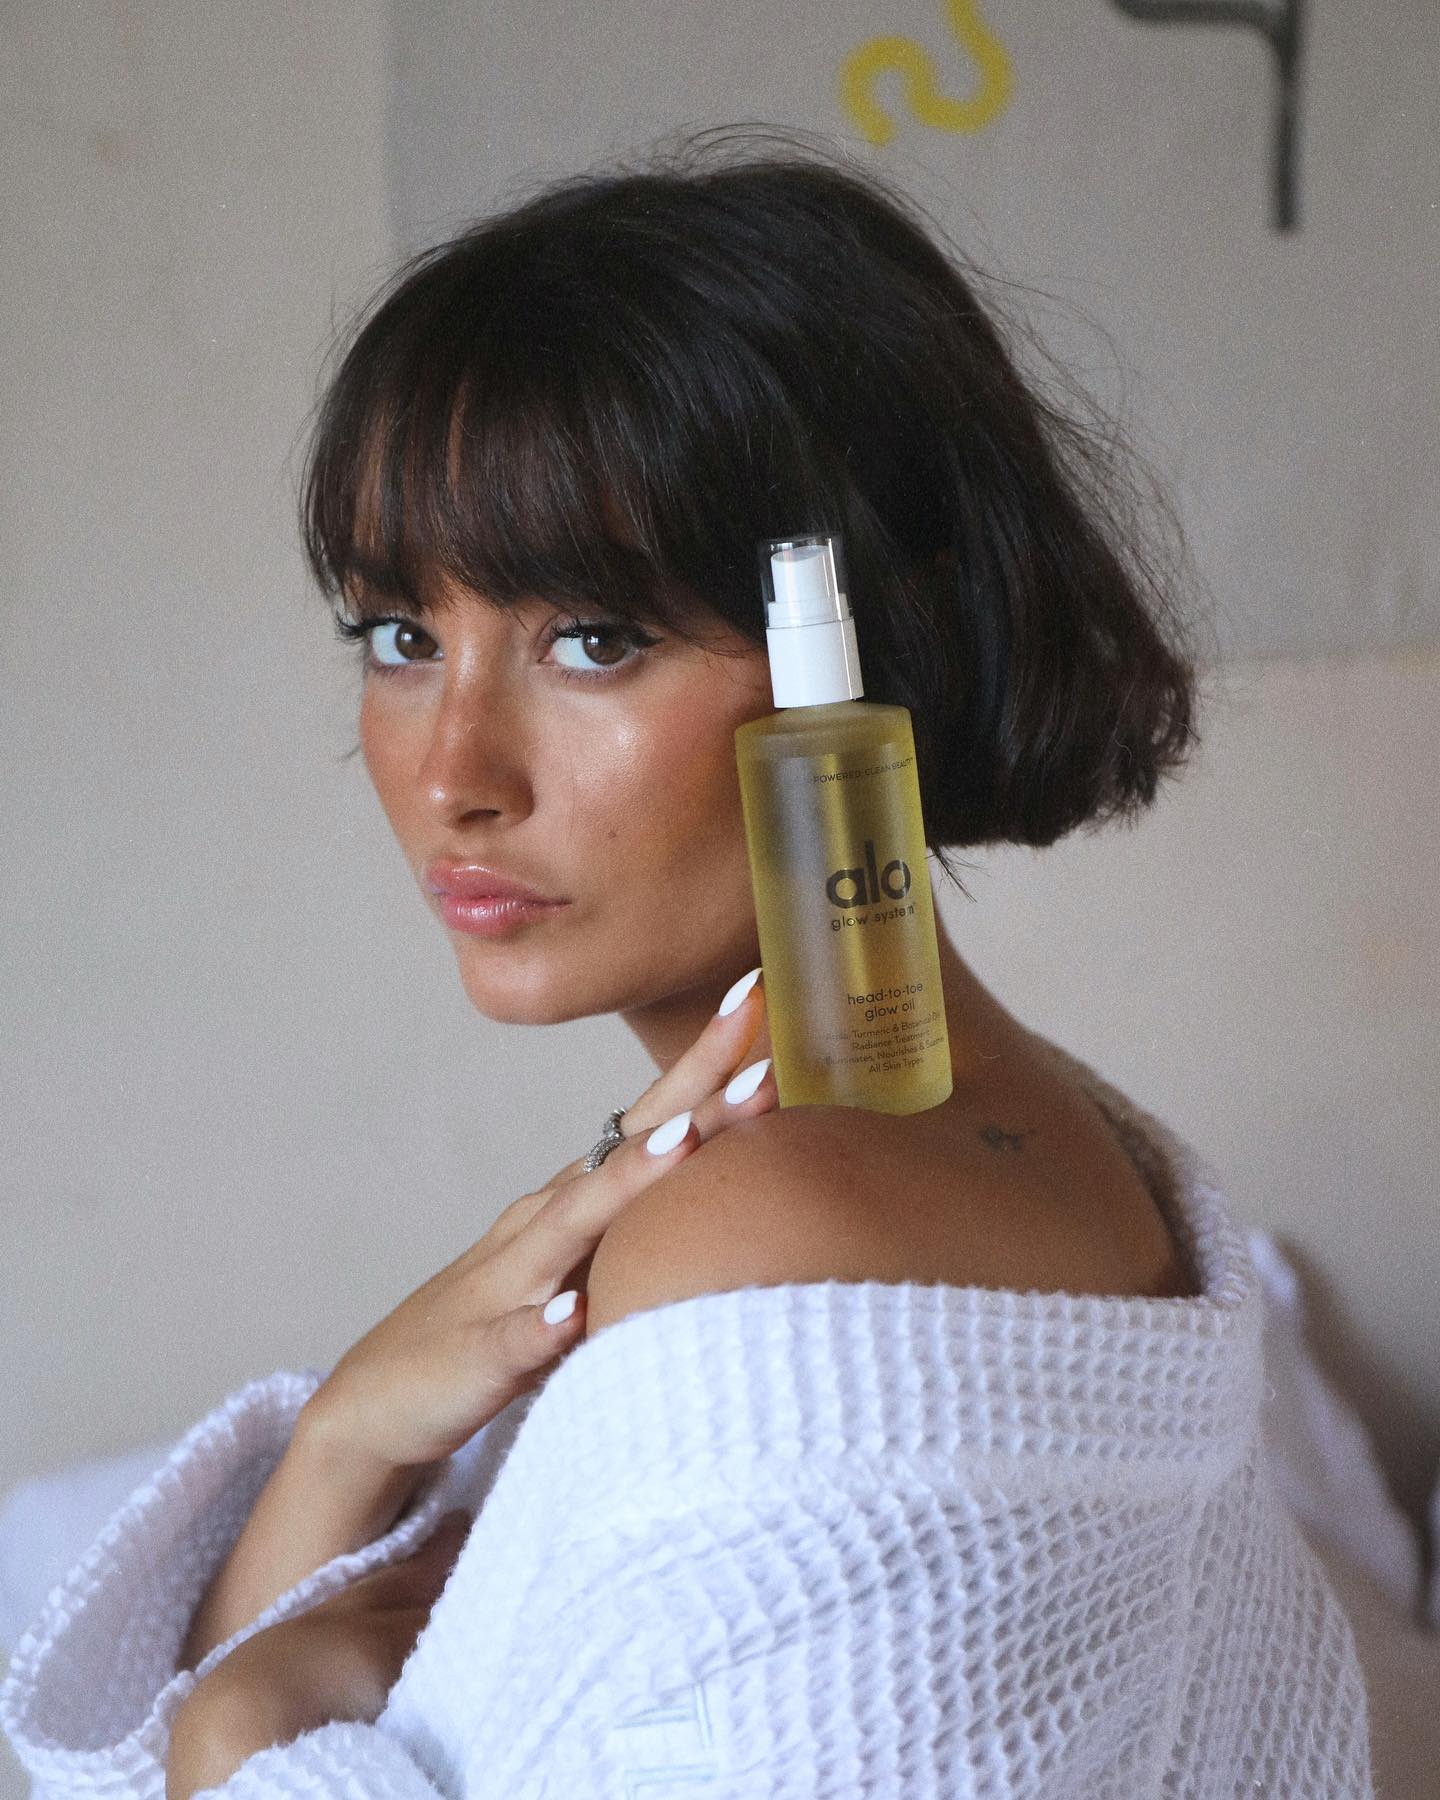 Woman with tanned skin, jaw length brown hair and curtain bangs poses with Head-To-Toe-Glow Oil bottle resting on her shoulder. 